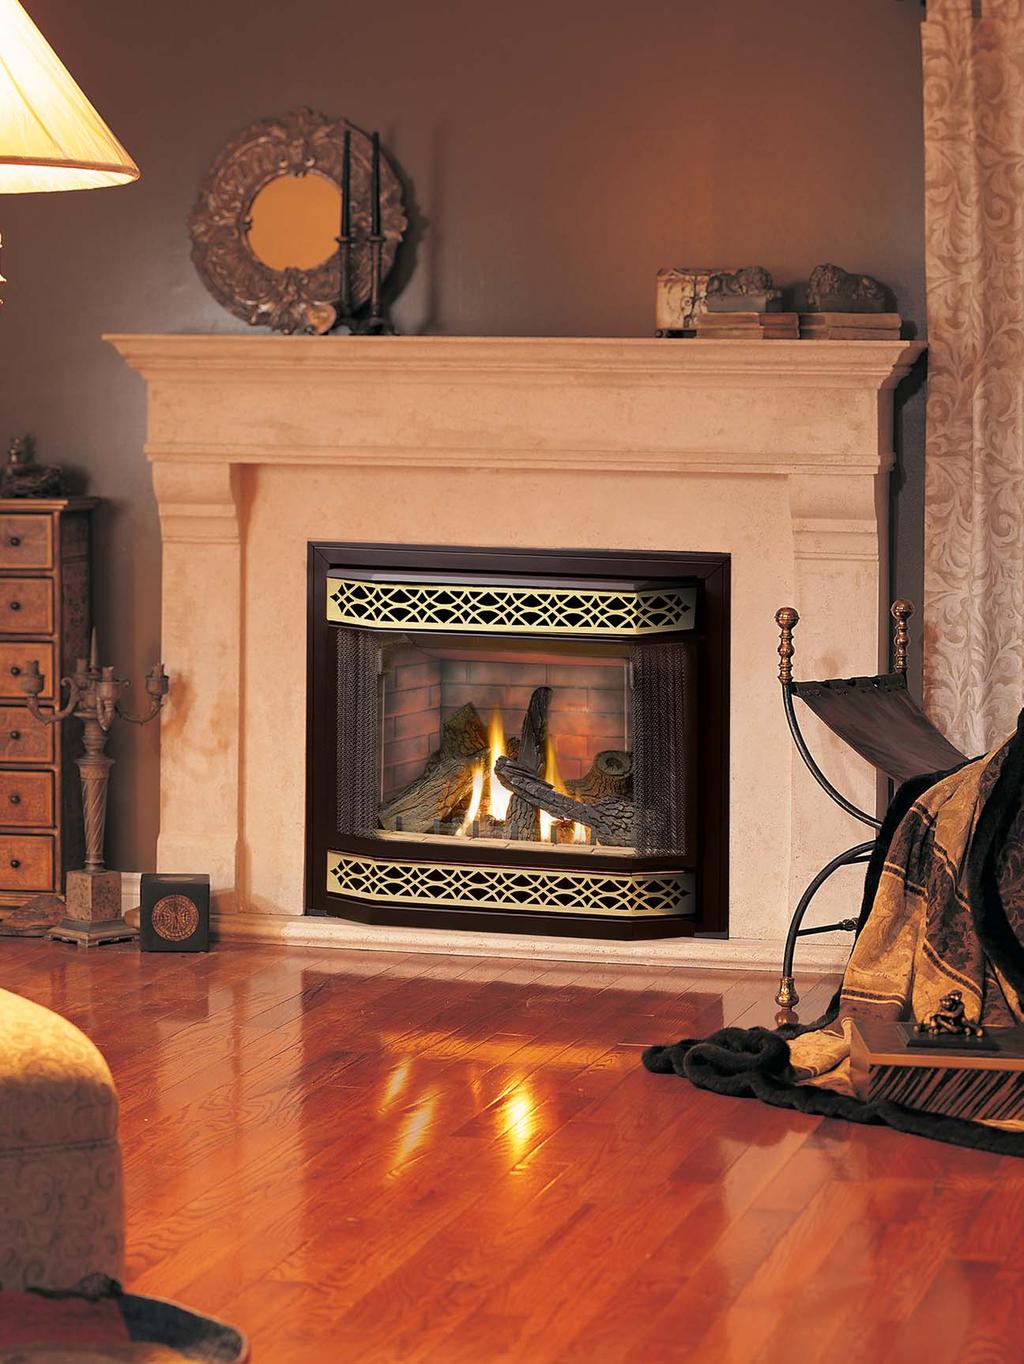 with BTU input ranging from 17,500 to as much as 27,000 this great looking fireplace is the way to go.